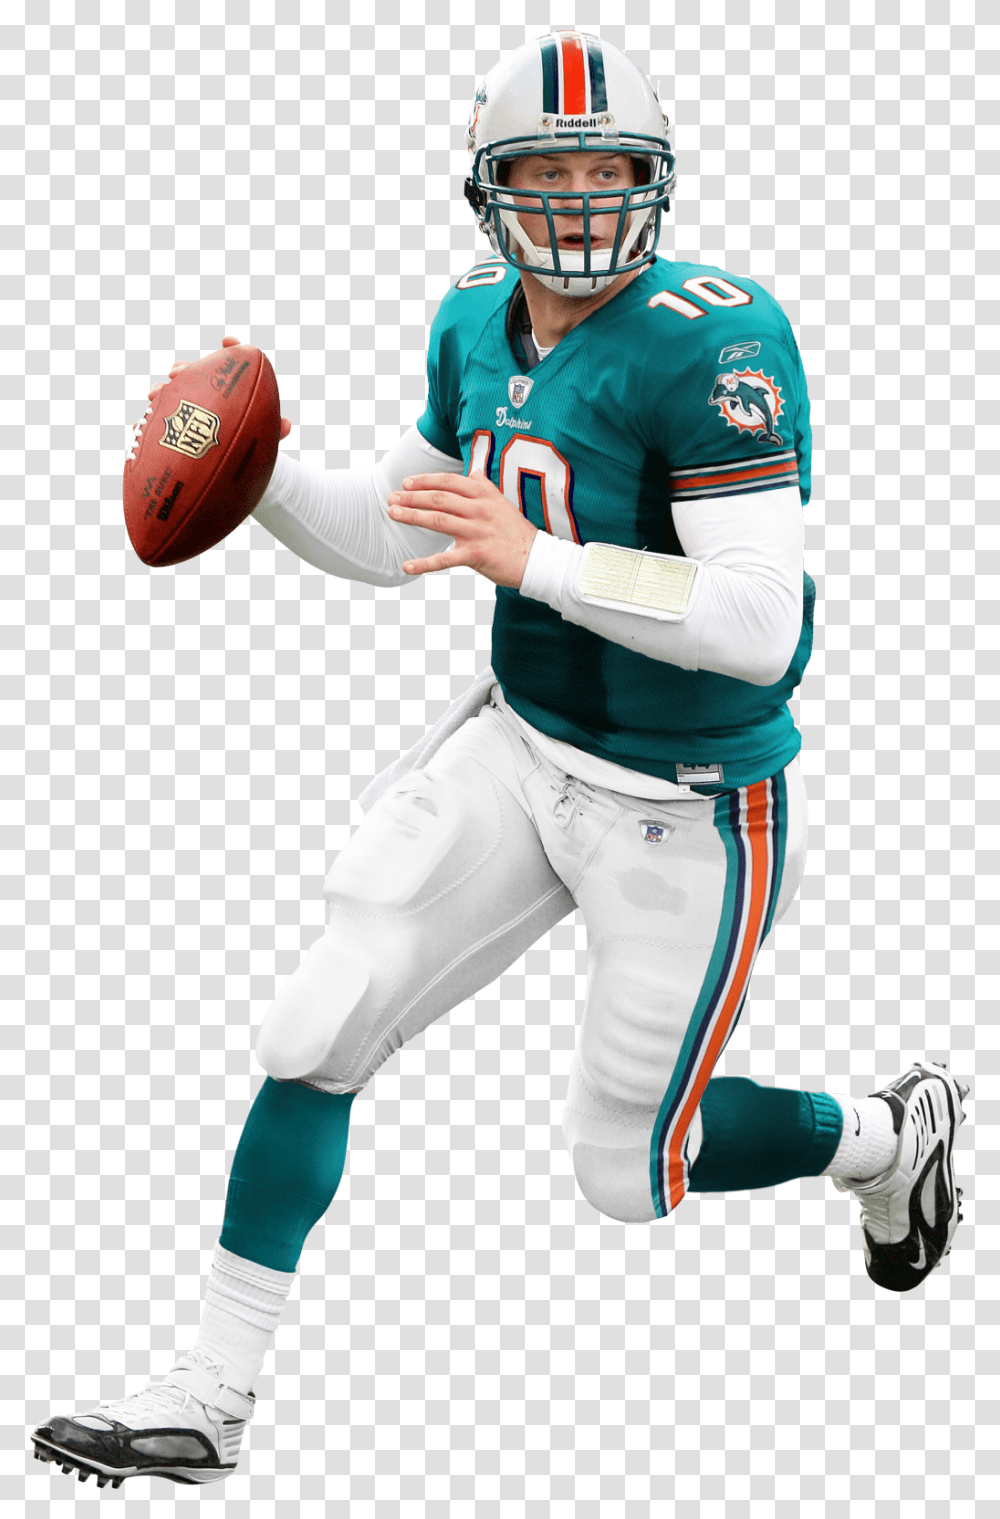 Miami Dolphins Player Dolphins Nfl Player, Helmet, Person, People Transparent Png